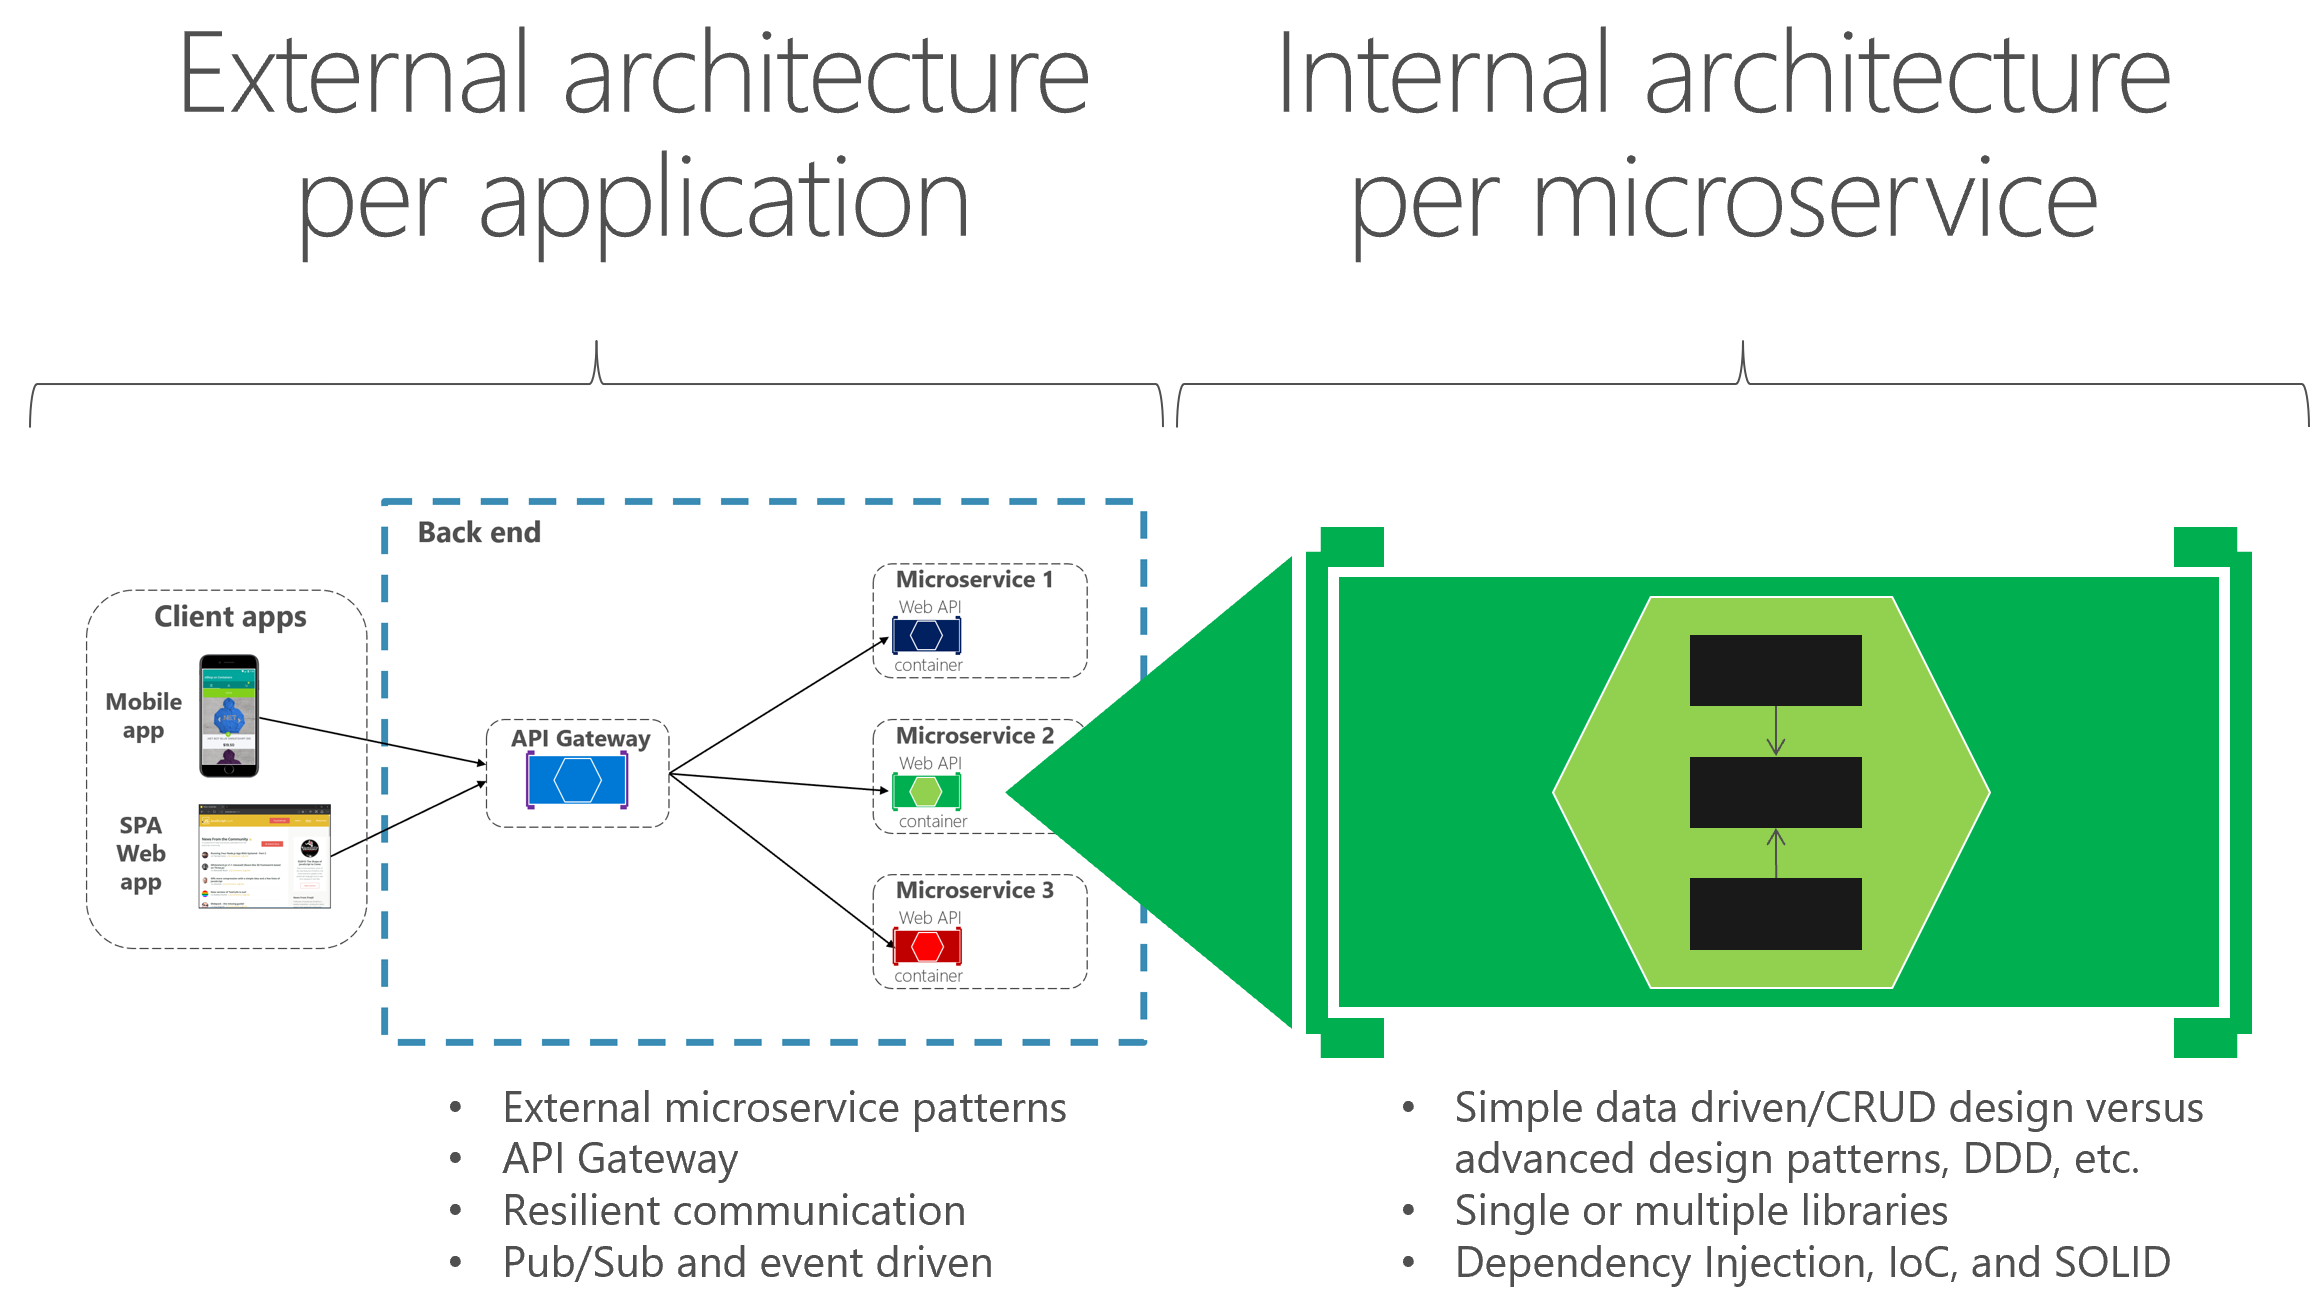 Diagram comparing external and internal architecture patterns.